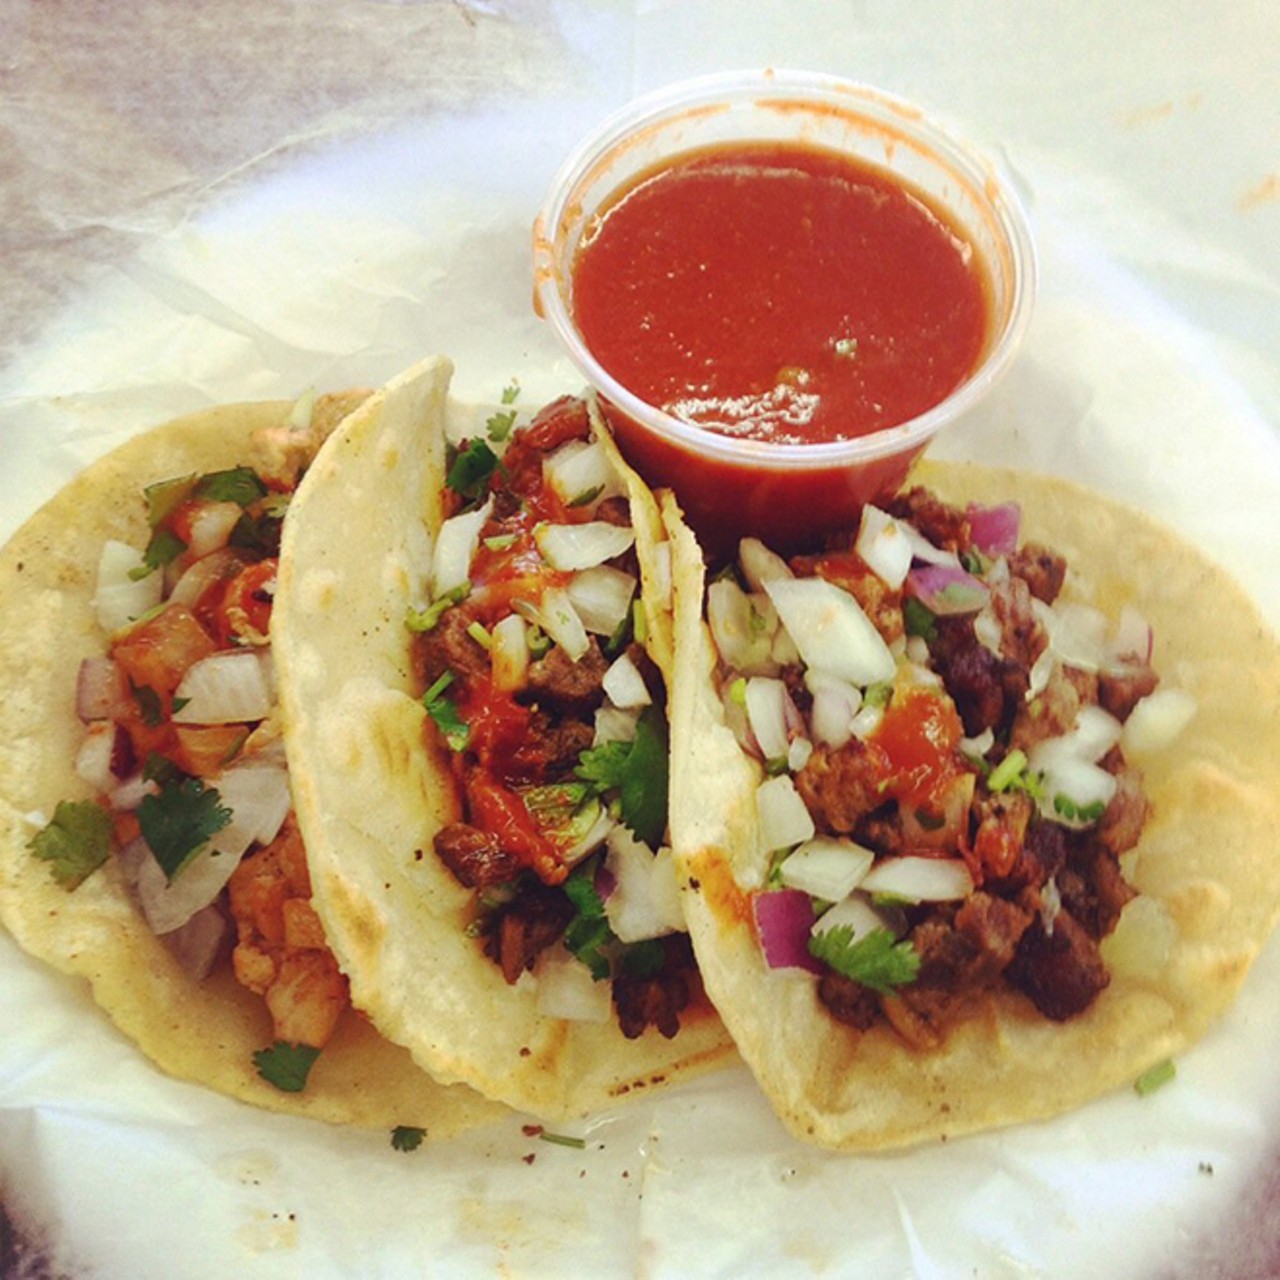 Tienda Mexicana Jalisco
2021 N. Goldenrod Road, 407-282-8339
Their spicy brown salsa is a revelation.
Photo via Yelp